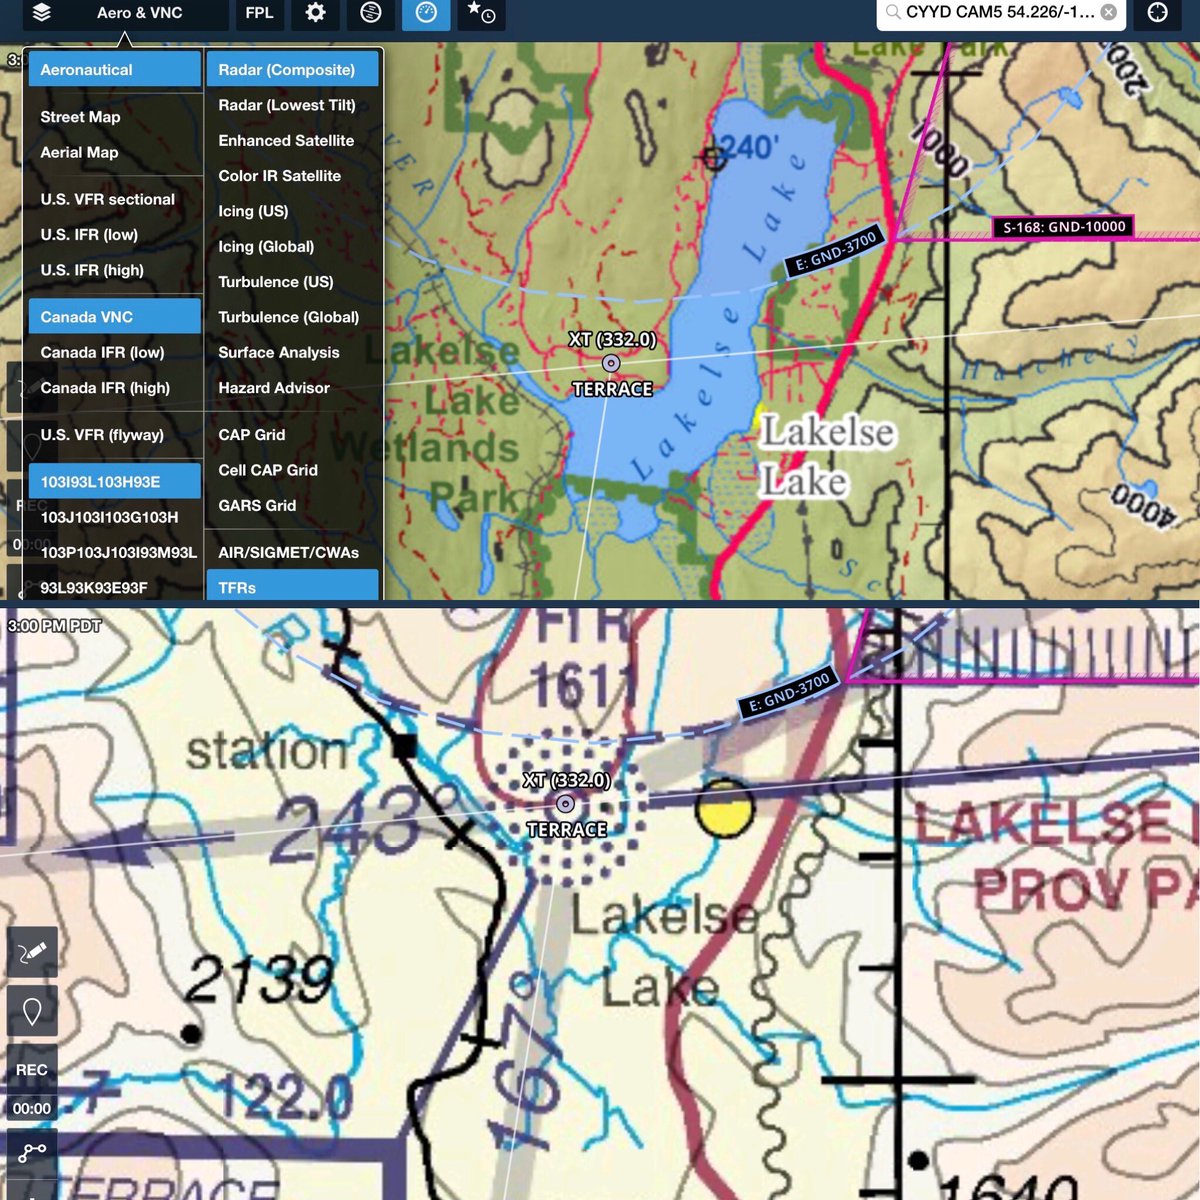 Question for ⁦@navcanada⁩. Why does Lakelse Lake not appear as a body of water on the Kitimat VNC?